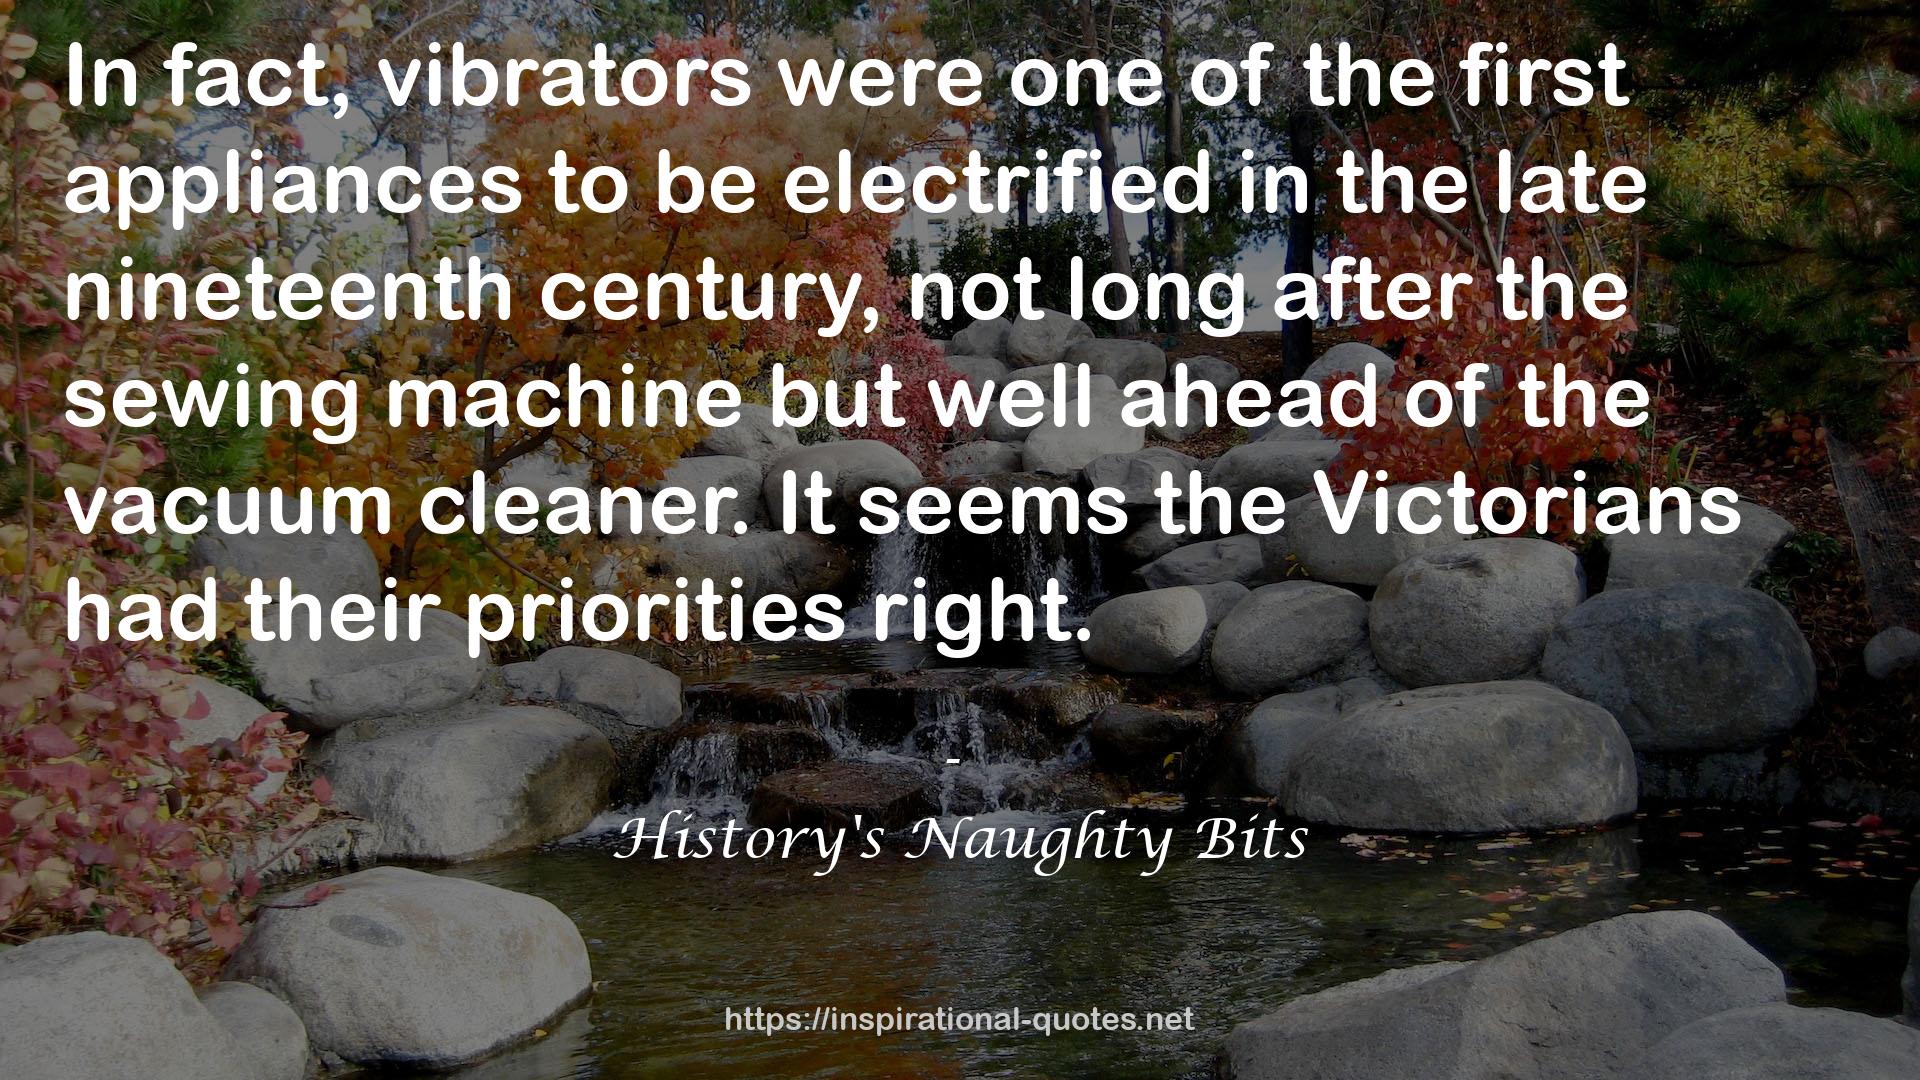 History's Naughty Bits QUOTES